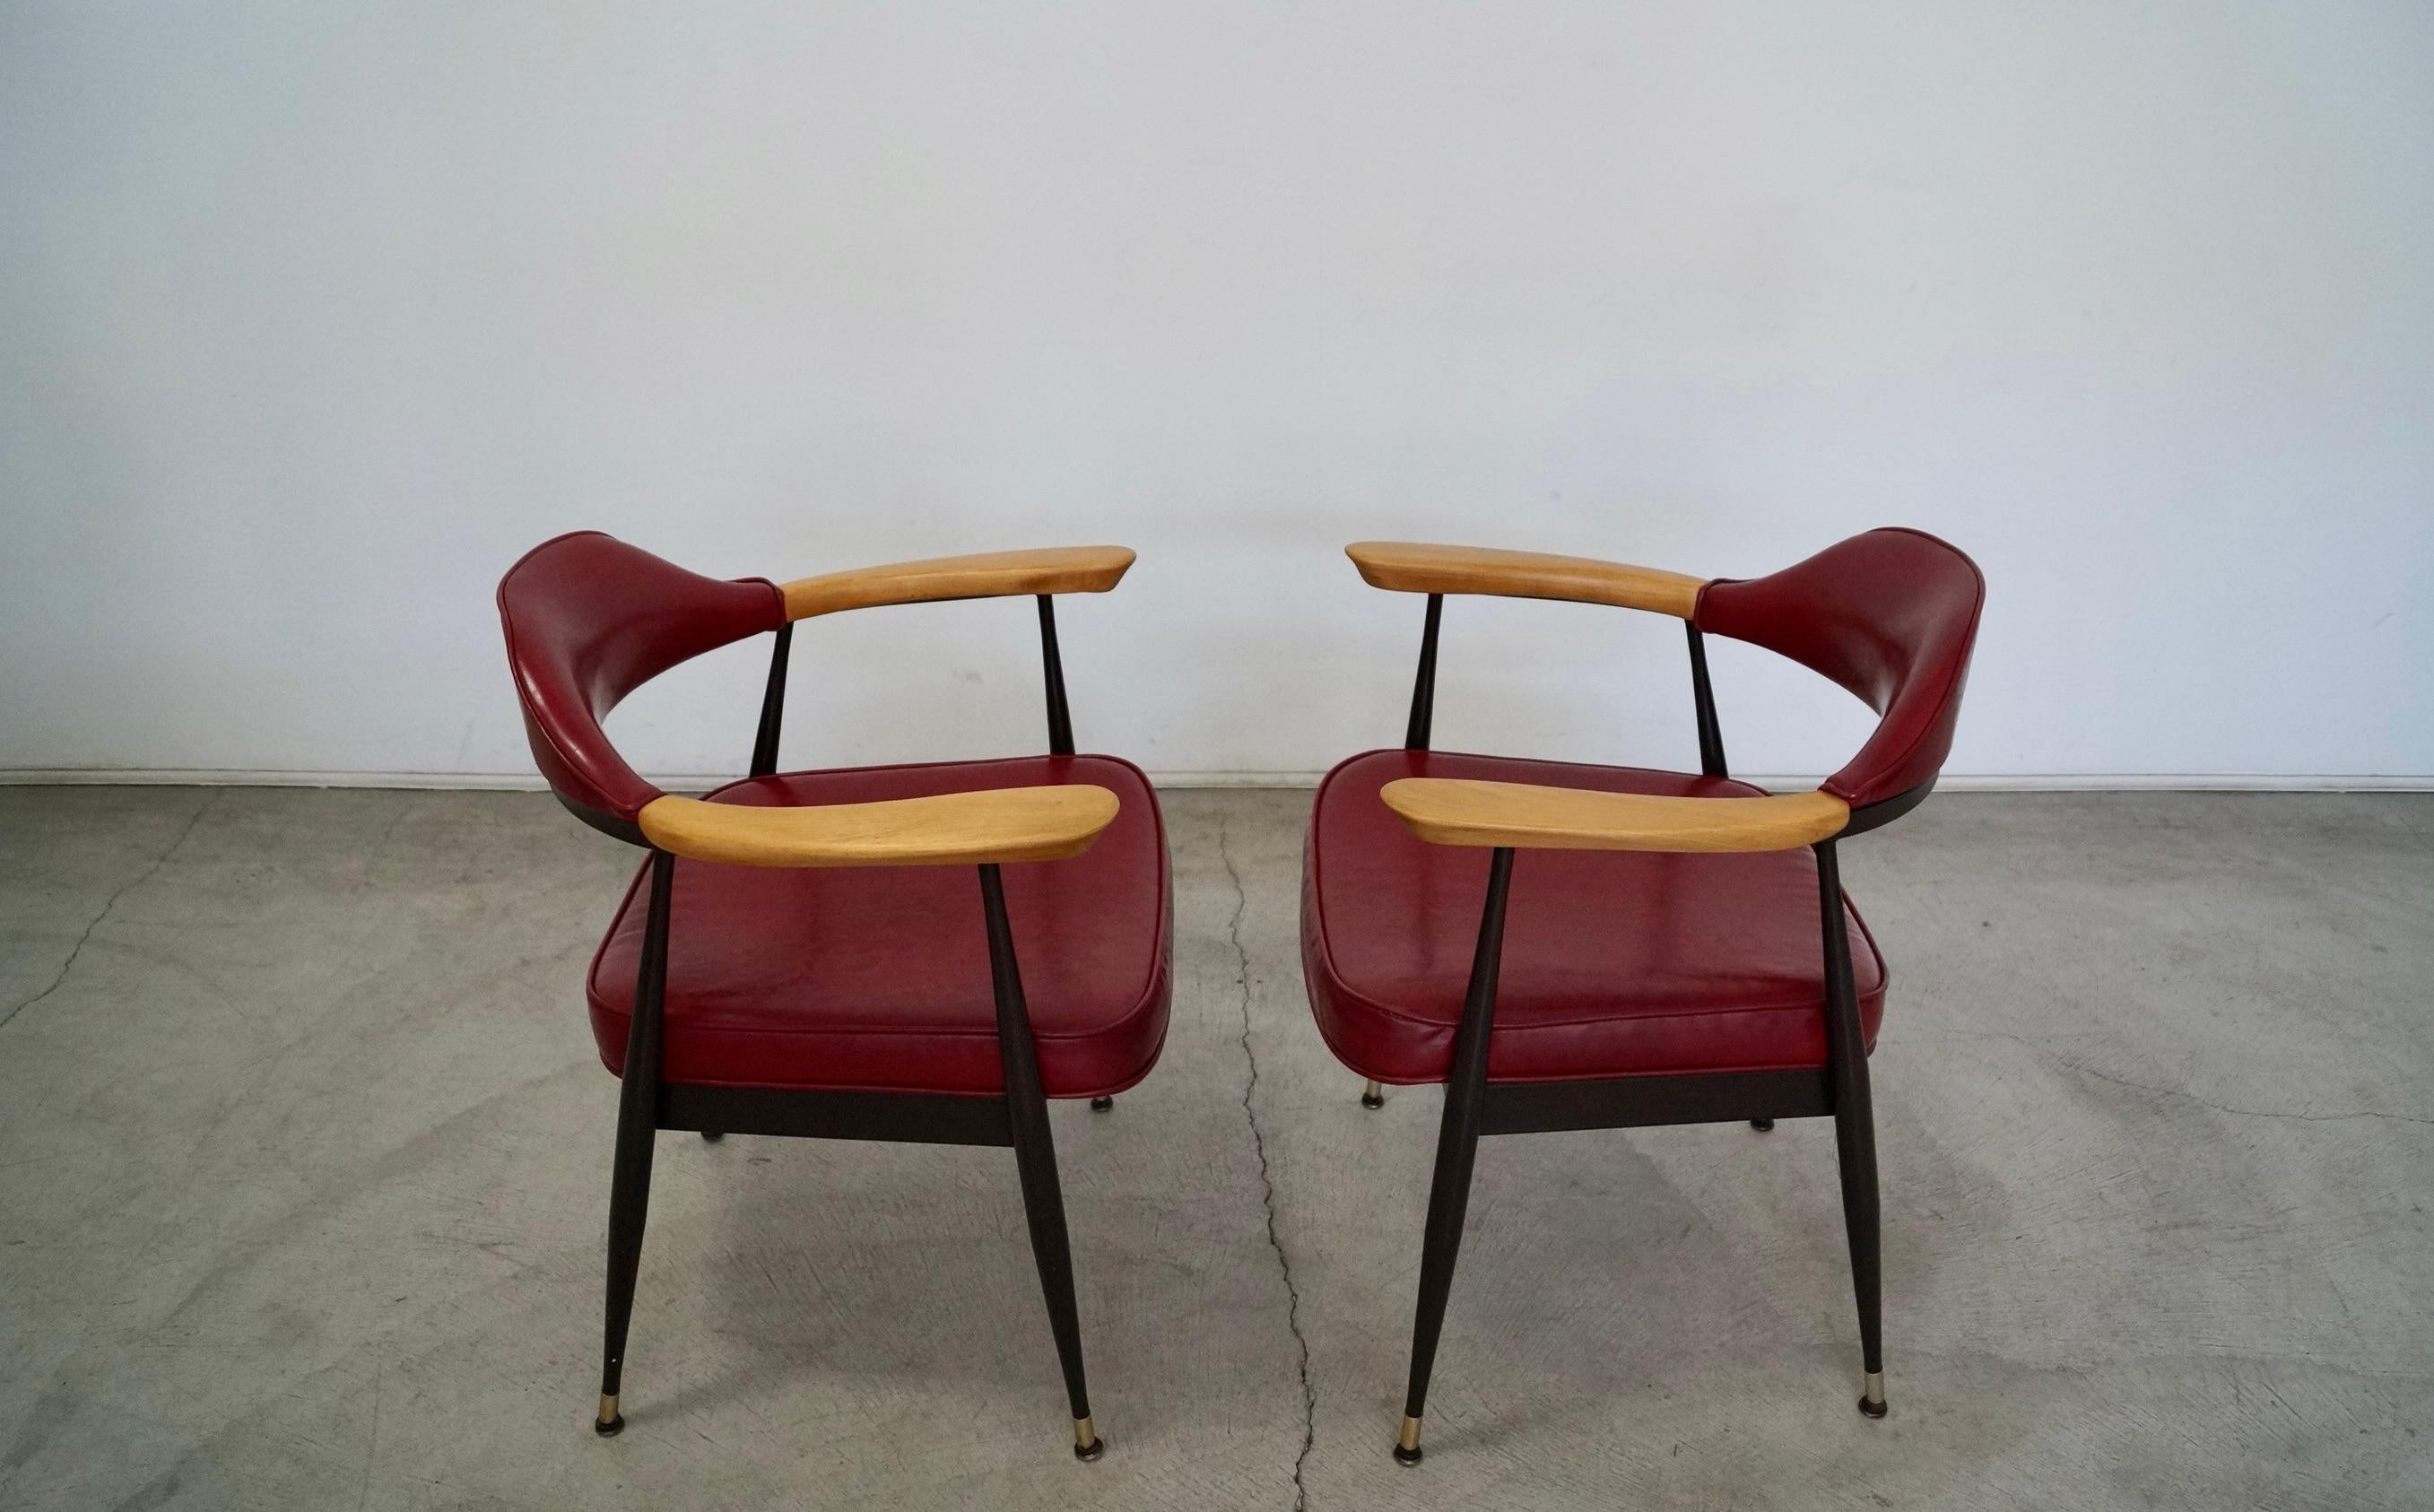 1970's Mid-Century Modern Metal & Wood Armchairs - a Pair For Sale 3